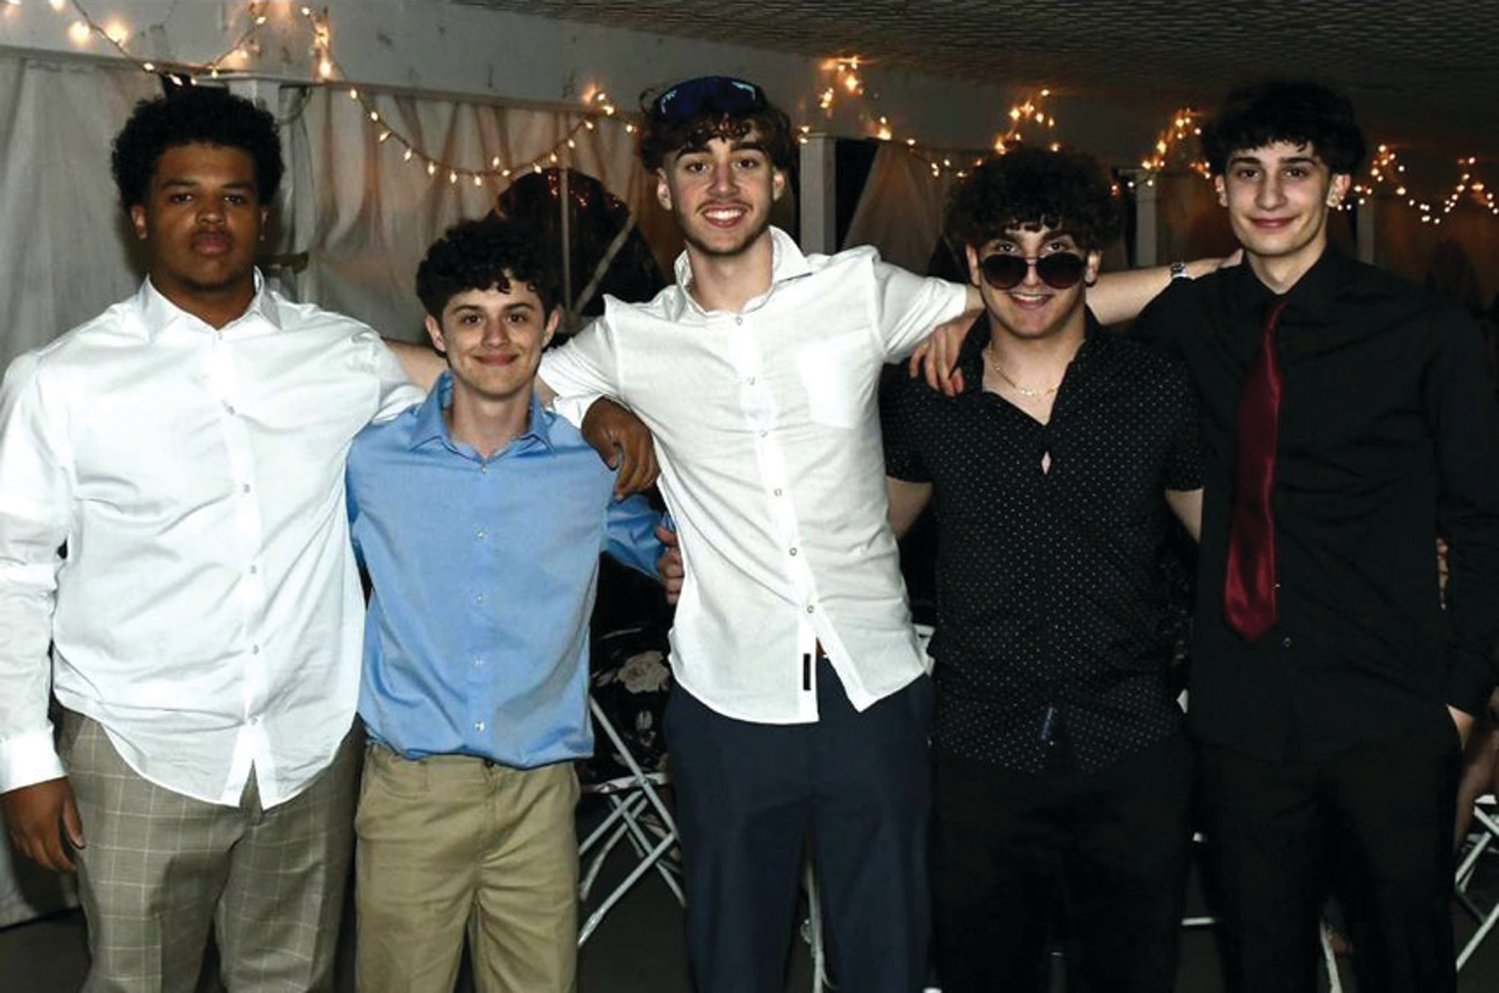 KING ME: The Semi King Court posing for a photo together. From left to right, Armani Arias, Kevin Biscelli, Jacob Carr, Steven Finegan and James Pastore.